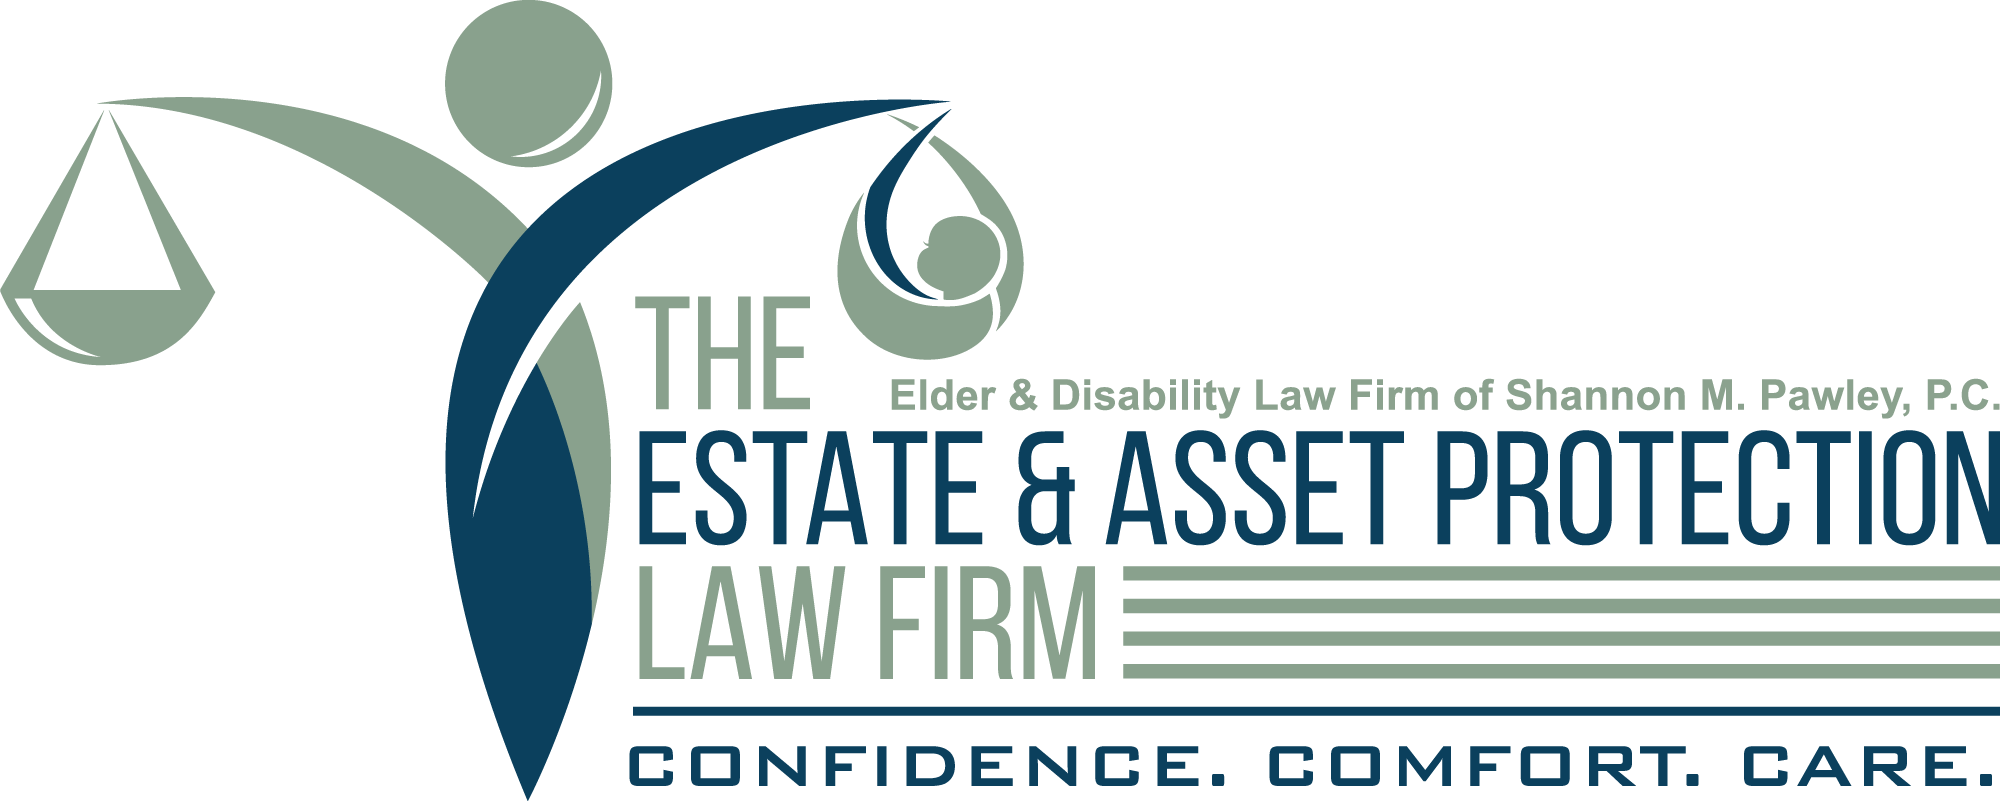 Image of trusts revocable living trust financial planning estate planning durable powers of attorney banking asset protection  on estate management asset protection law site